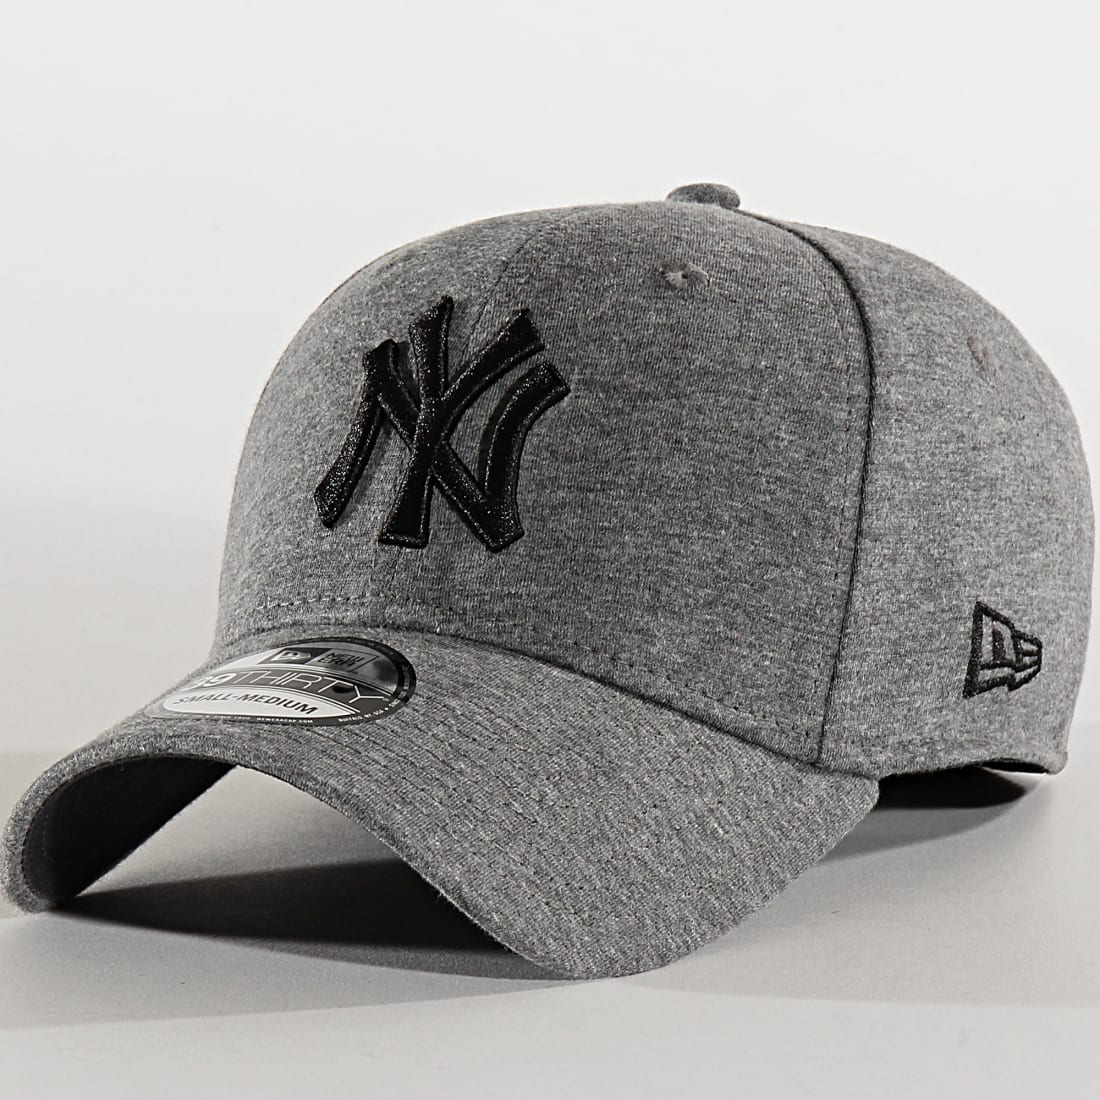 Casquette gris Homme New Era NY Yankees Pipe Pop 9Forty pas cher